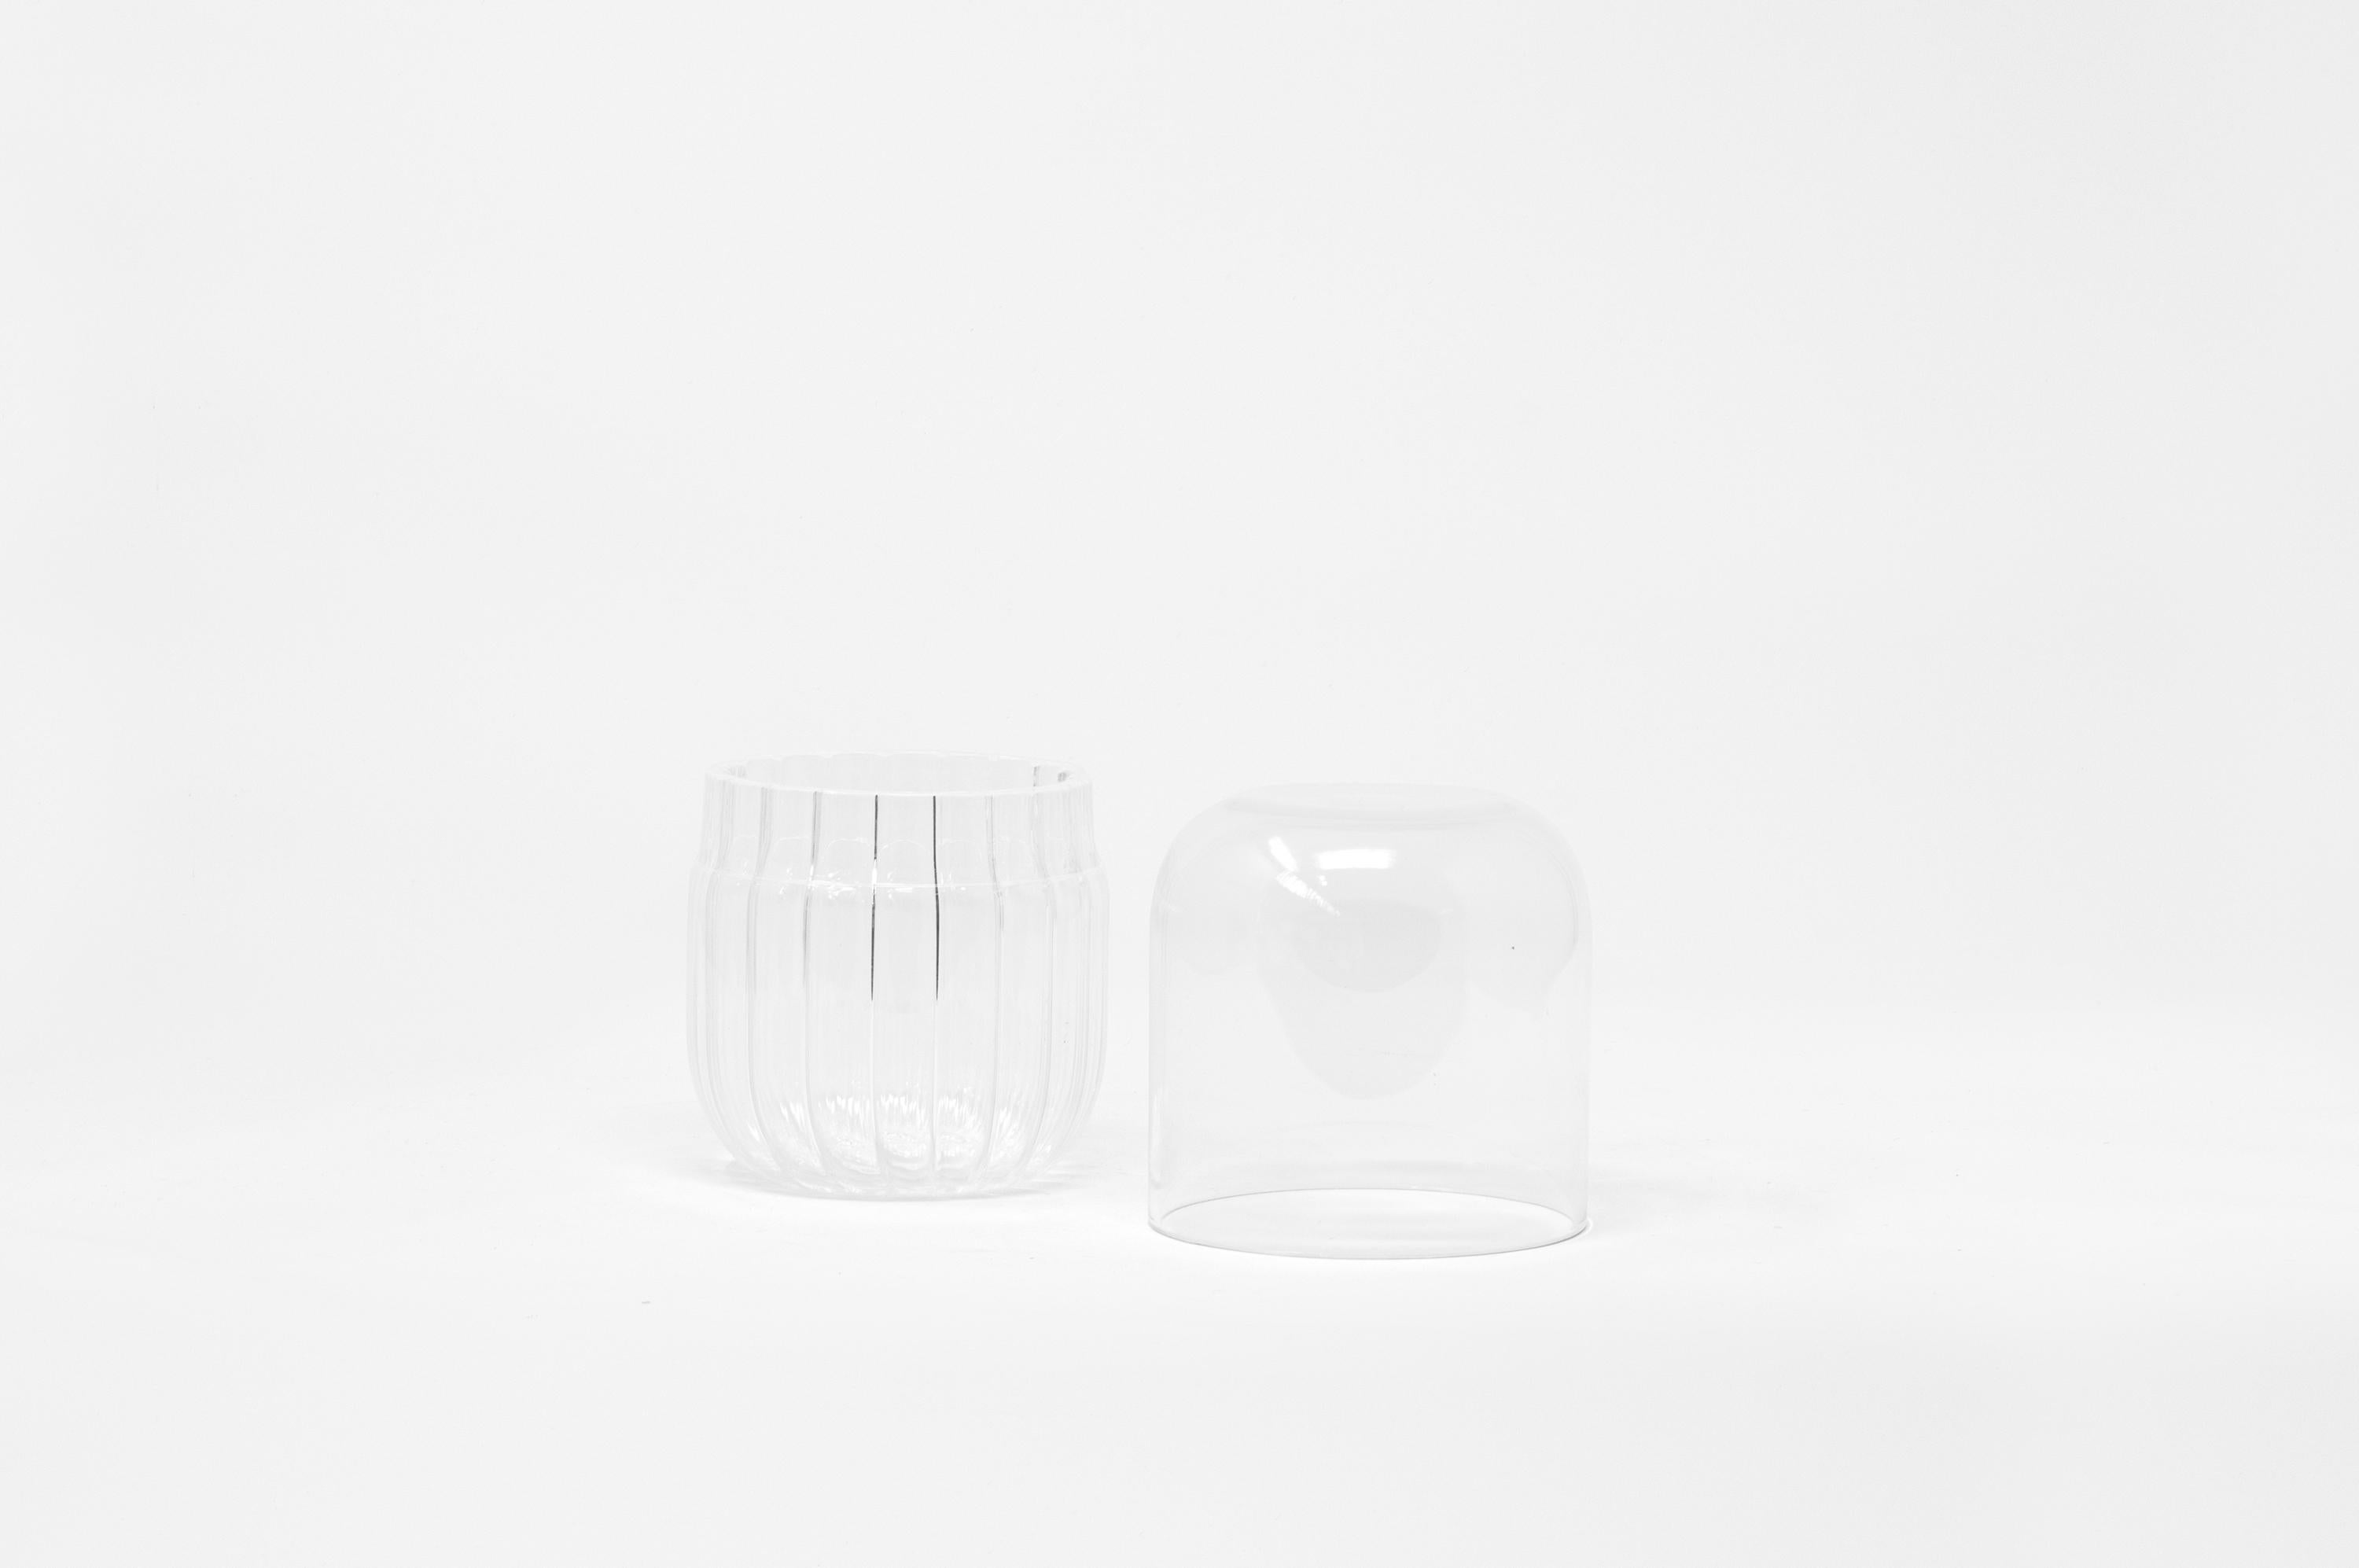 Innesti S is a container in borosilicate glass masterfully blown in Venice by Soffieria for Hands on Design. Designed by GumDesign this piece is characterized by the contrast between striped glass of the bottom and the smooth finish of the top; this